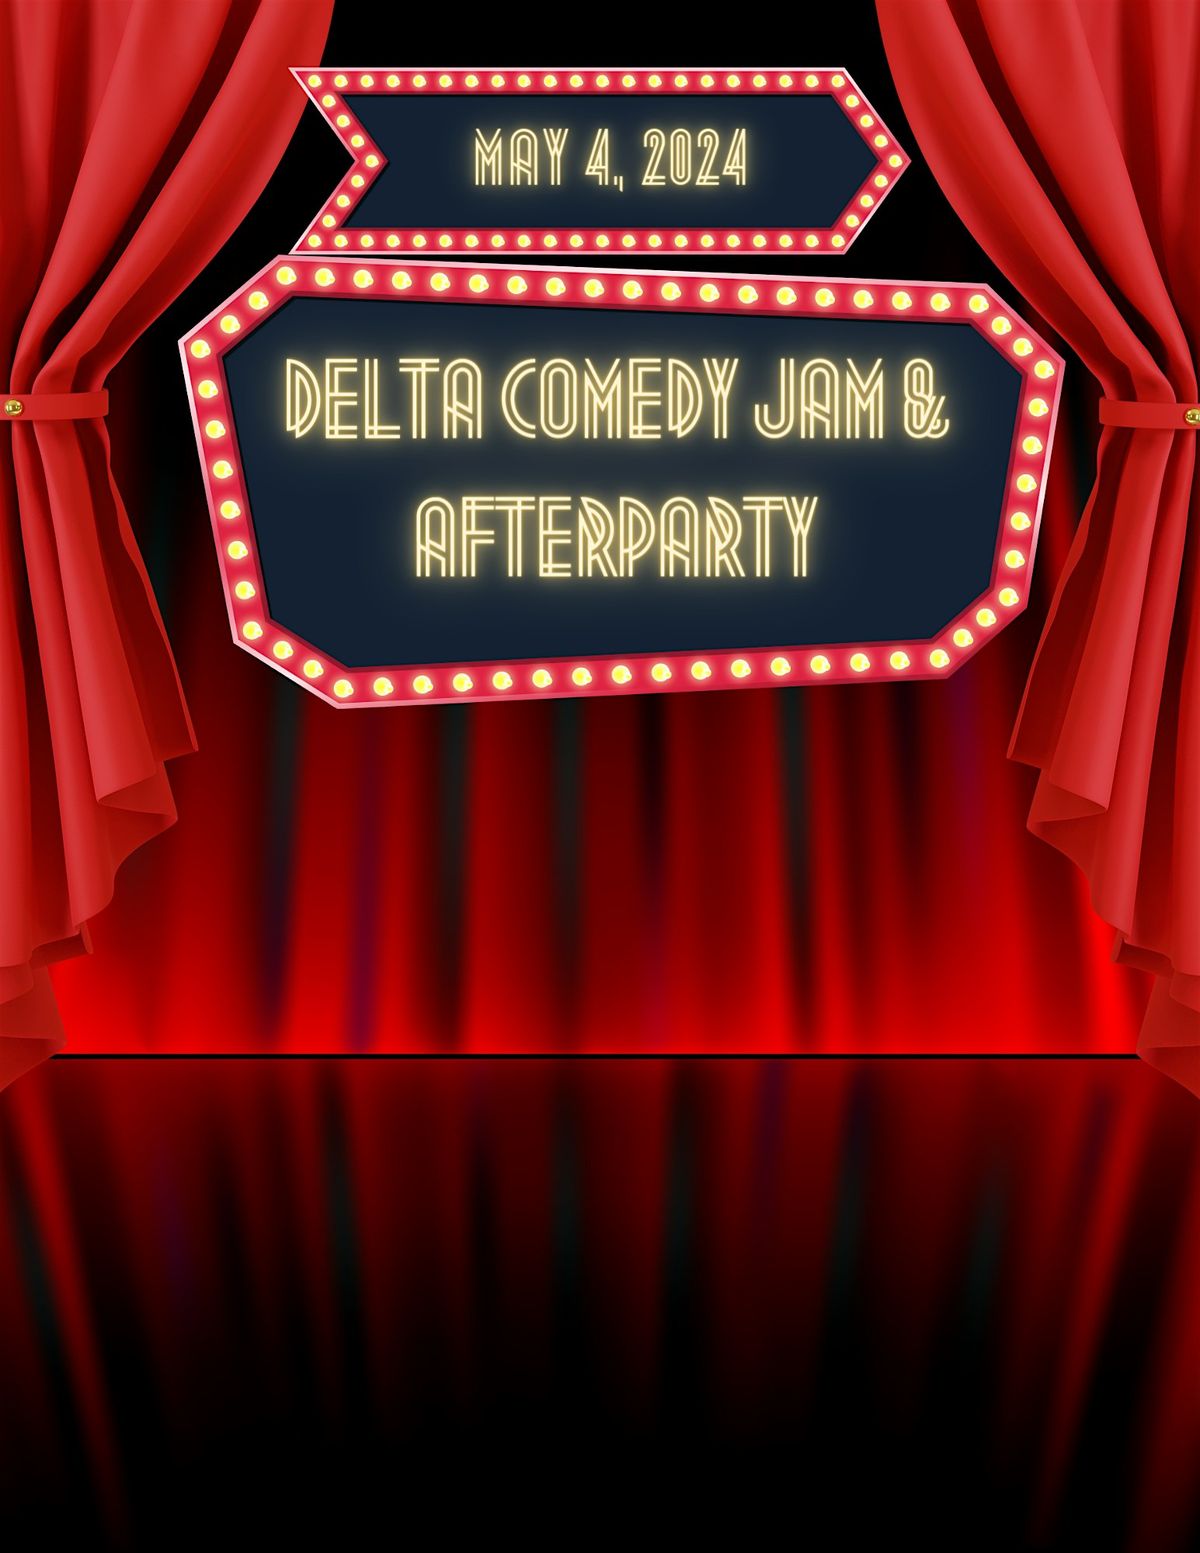 Delta Comedy Jam & Afterparty